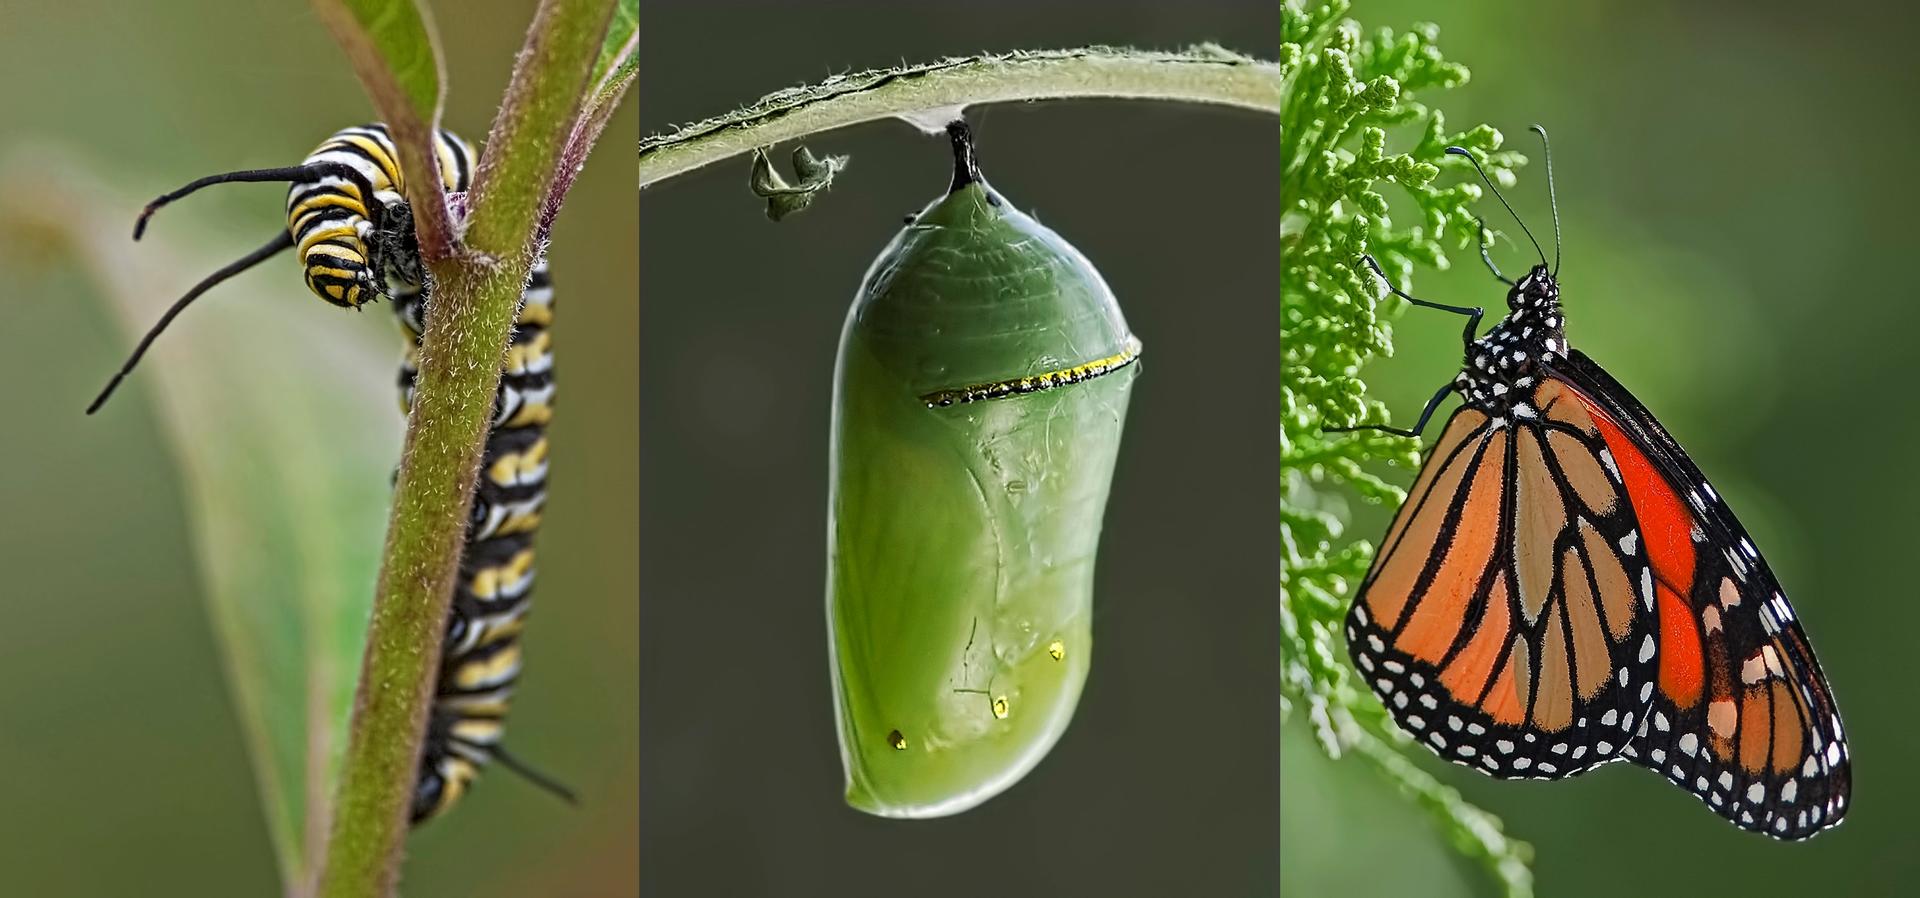 Triptych Insects on Plants - Macro photo contest | Photocrowd photo ...